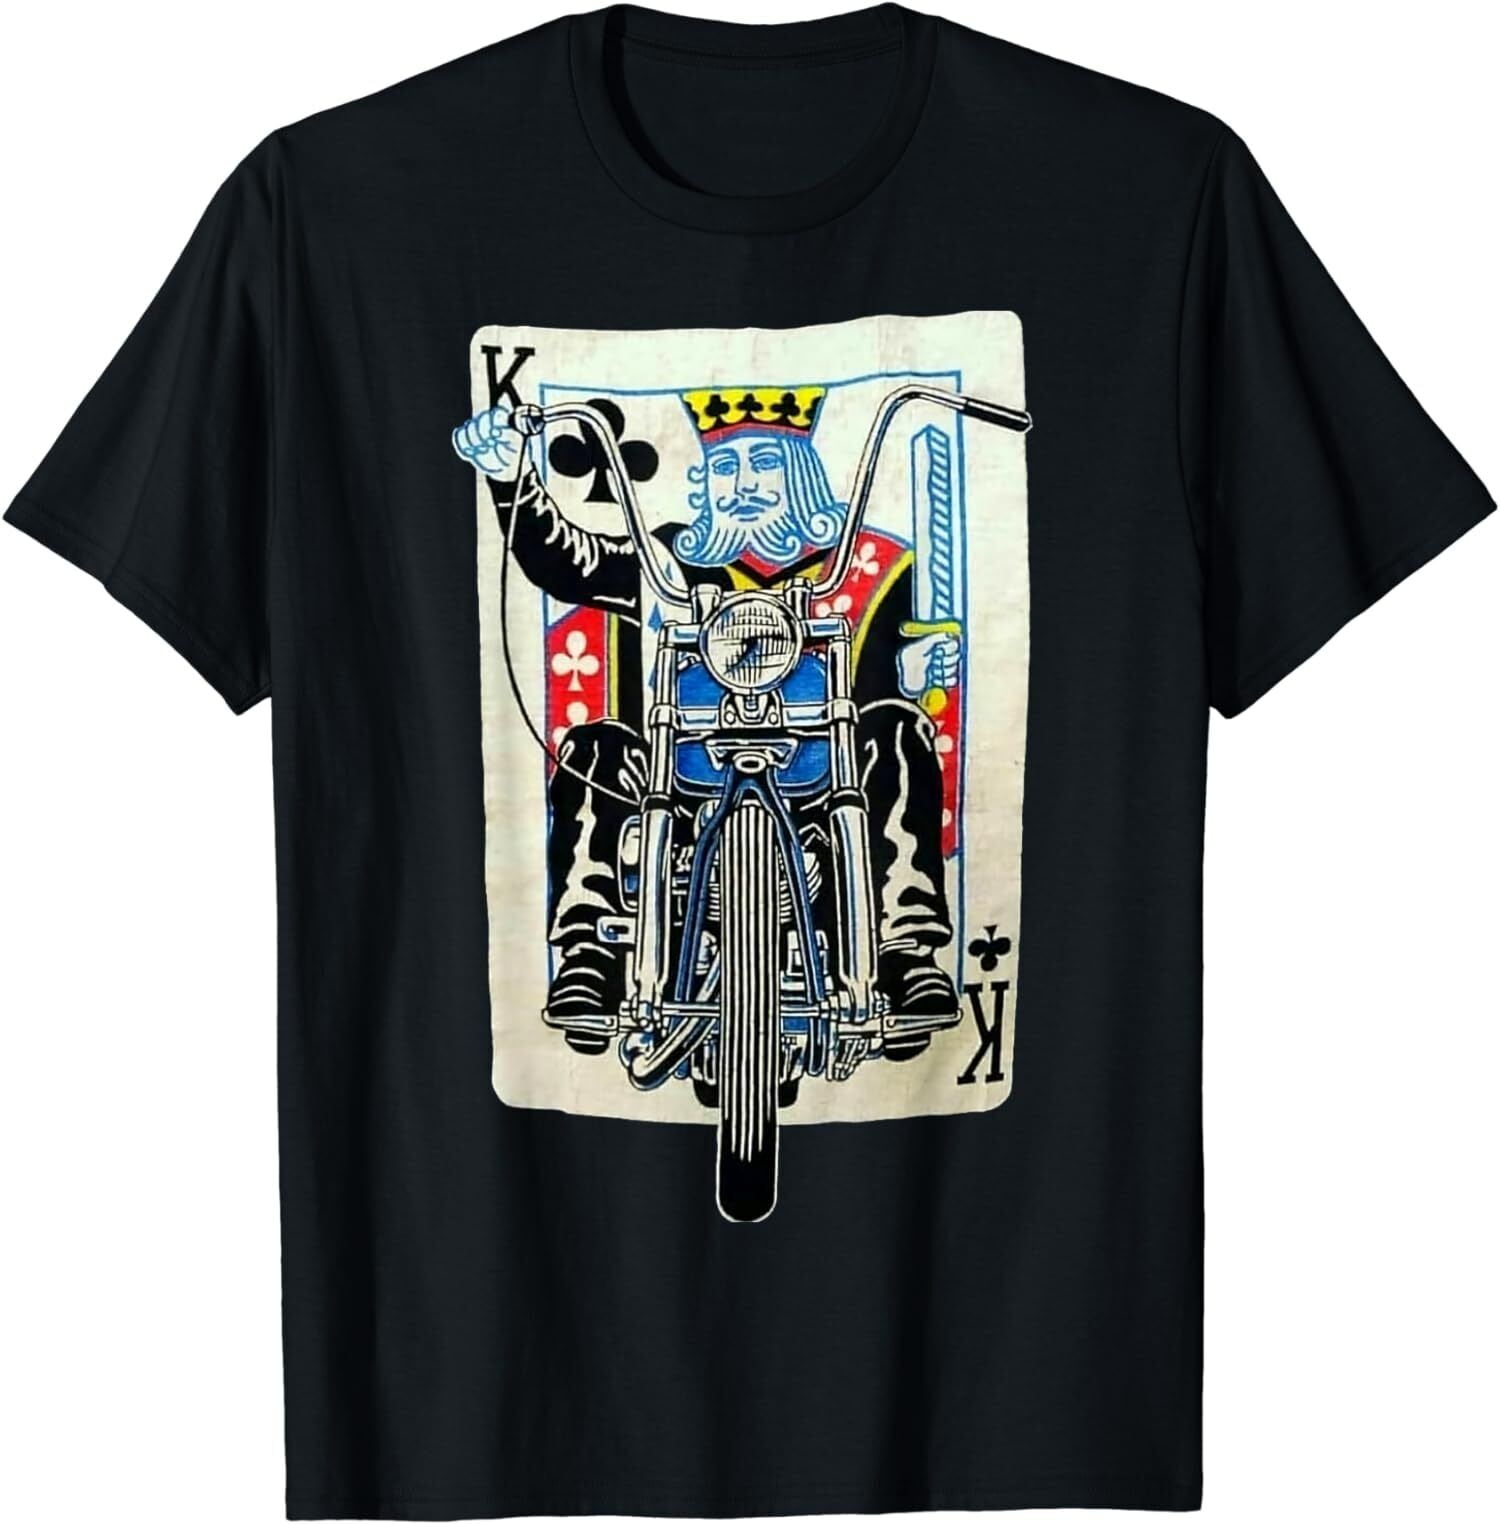 Biker King Of Clubs Playing Card Rider Motorcycle Tee T-Shirt S-3XL ...